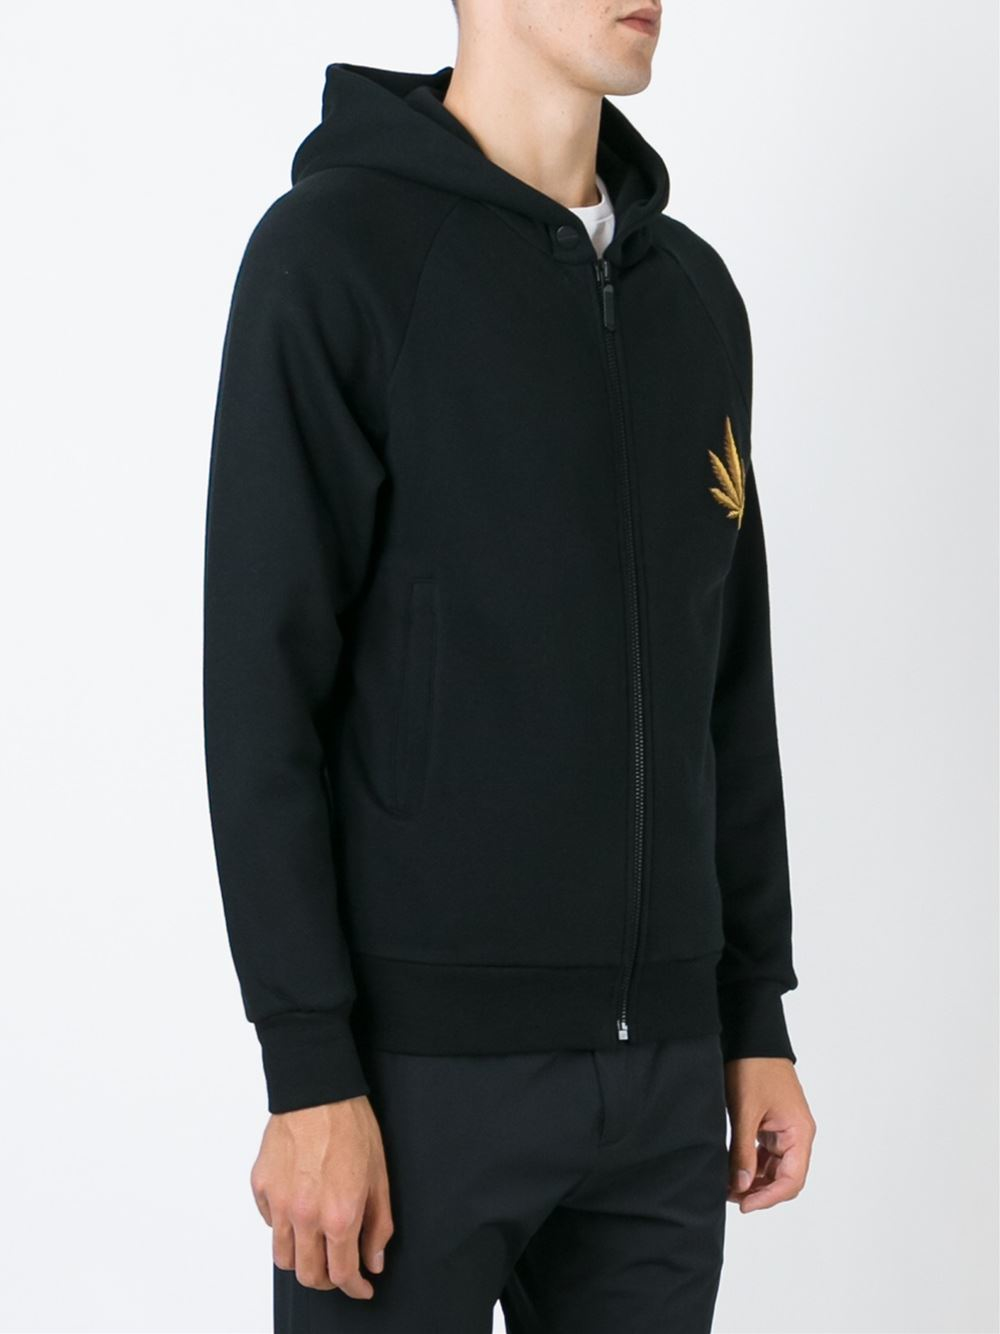 Palm Angels Embroidered Cannabis Leaf Hoodie in Black for Men - Lyst